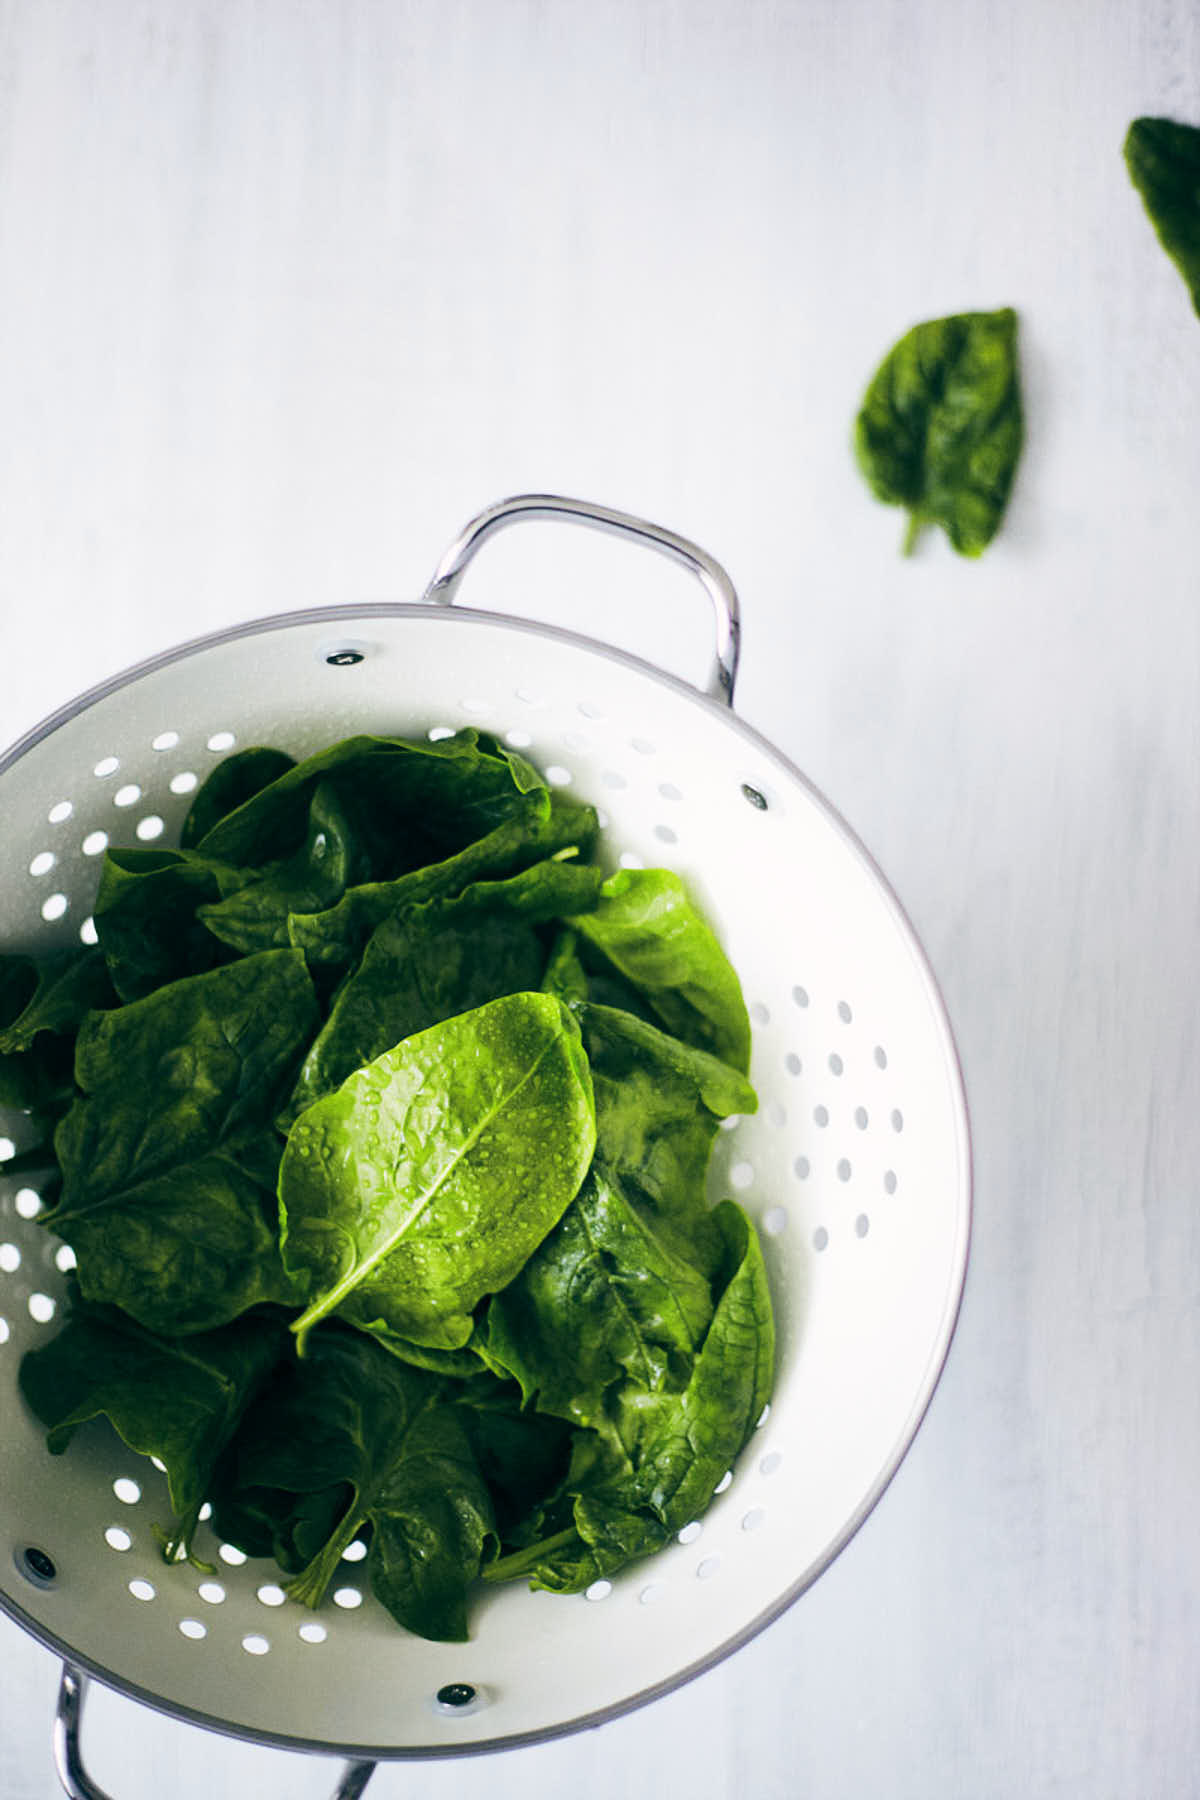 Spinach leaves in a colander after washing